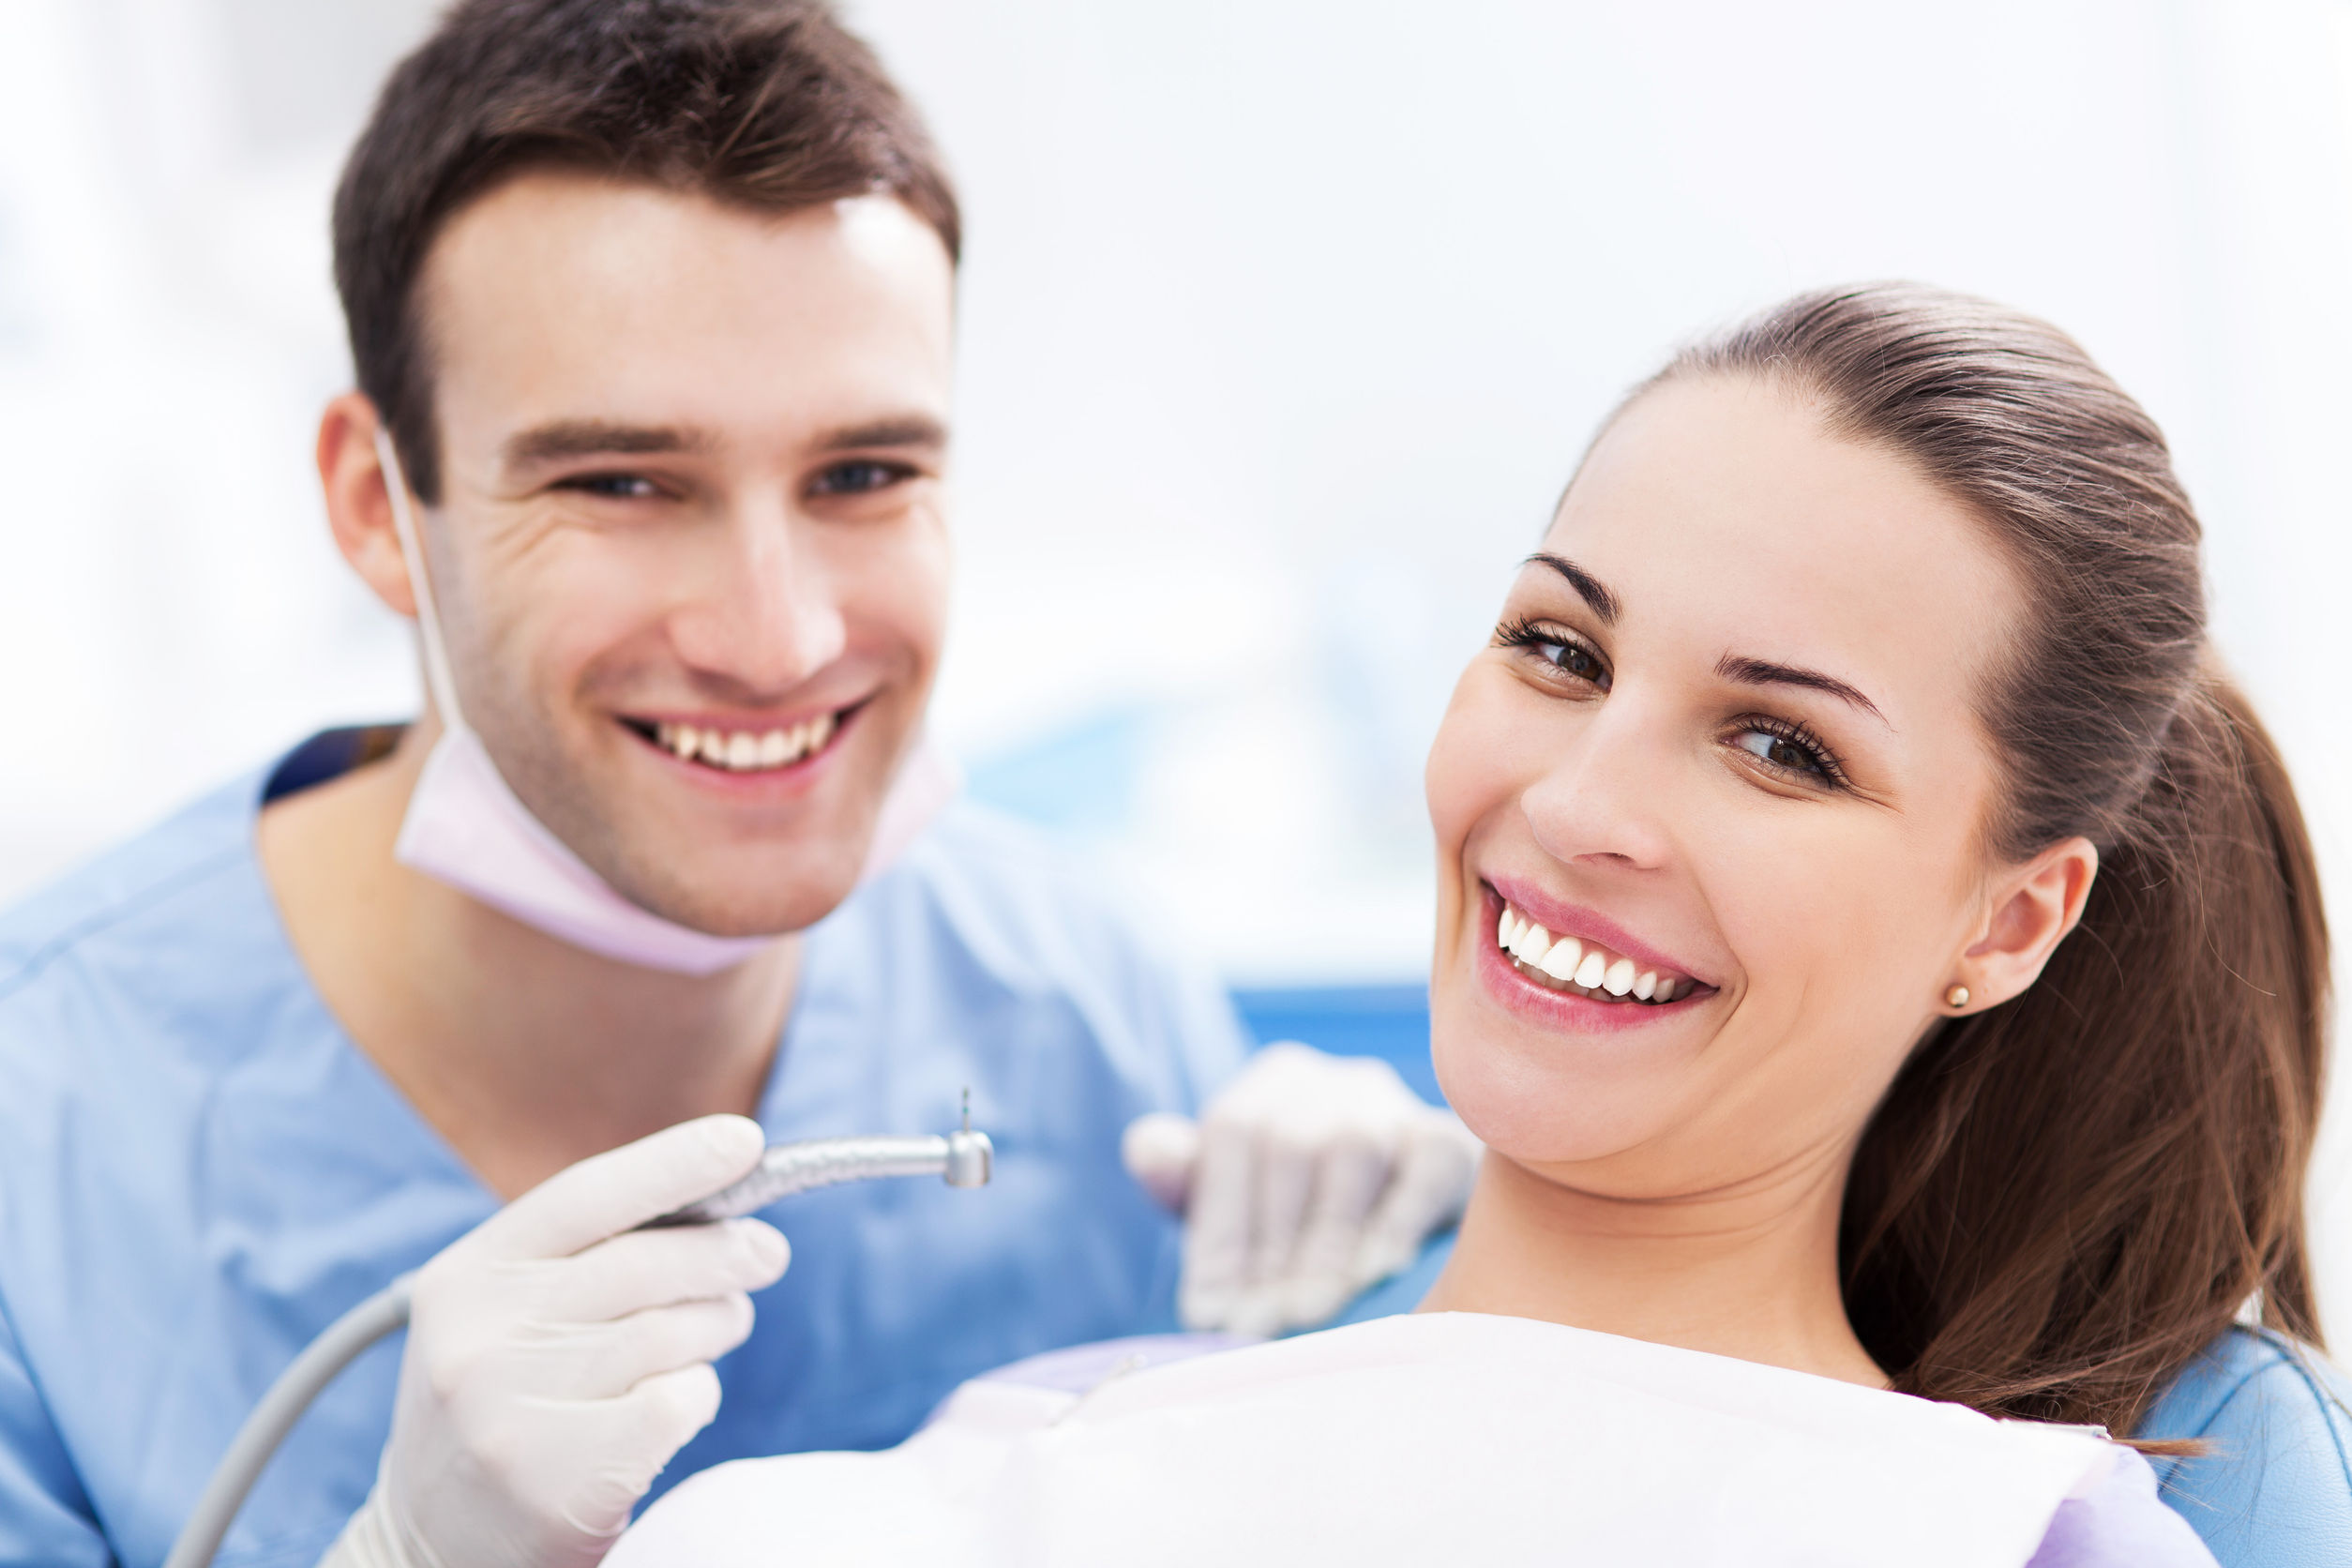 Where can I find a dentist in Peoria?